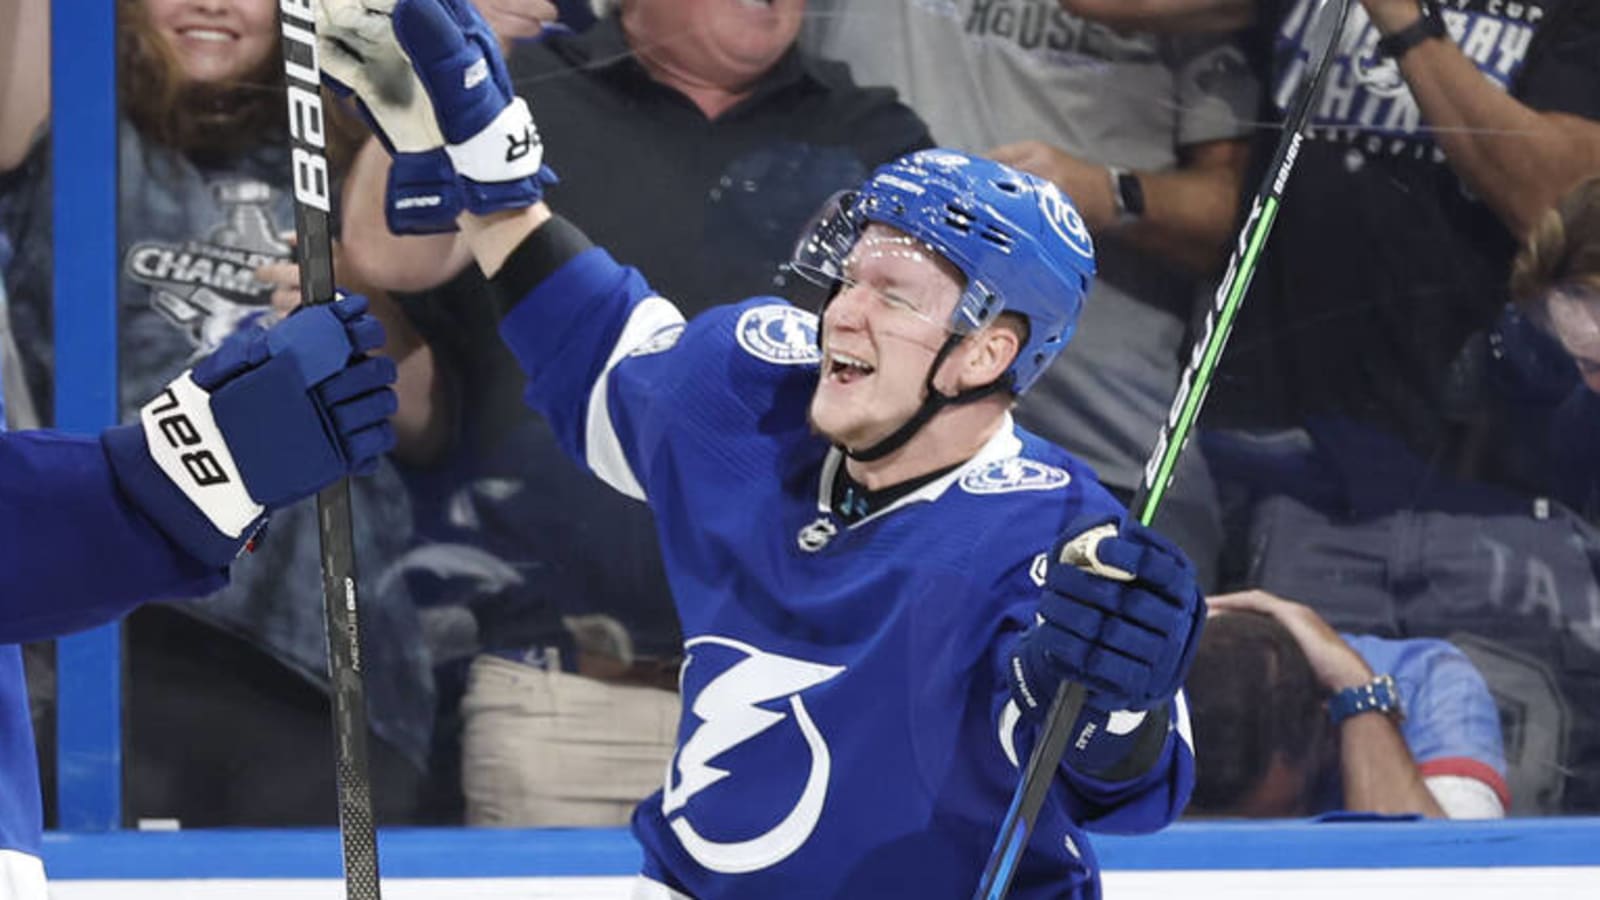 Watch: Palat's last-minute goal lift Lightning to Game 3 win